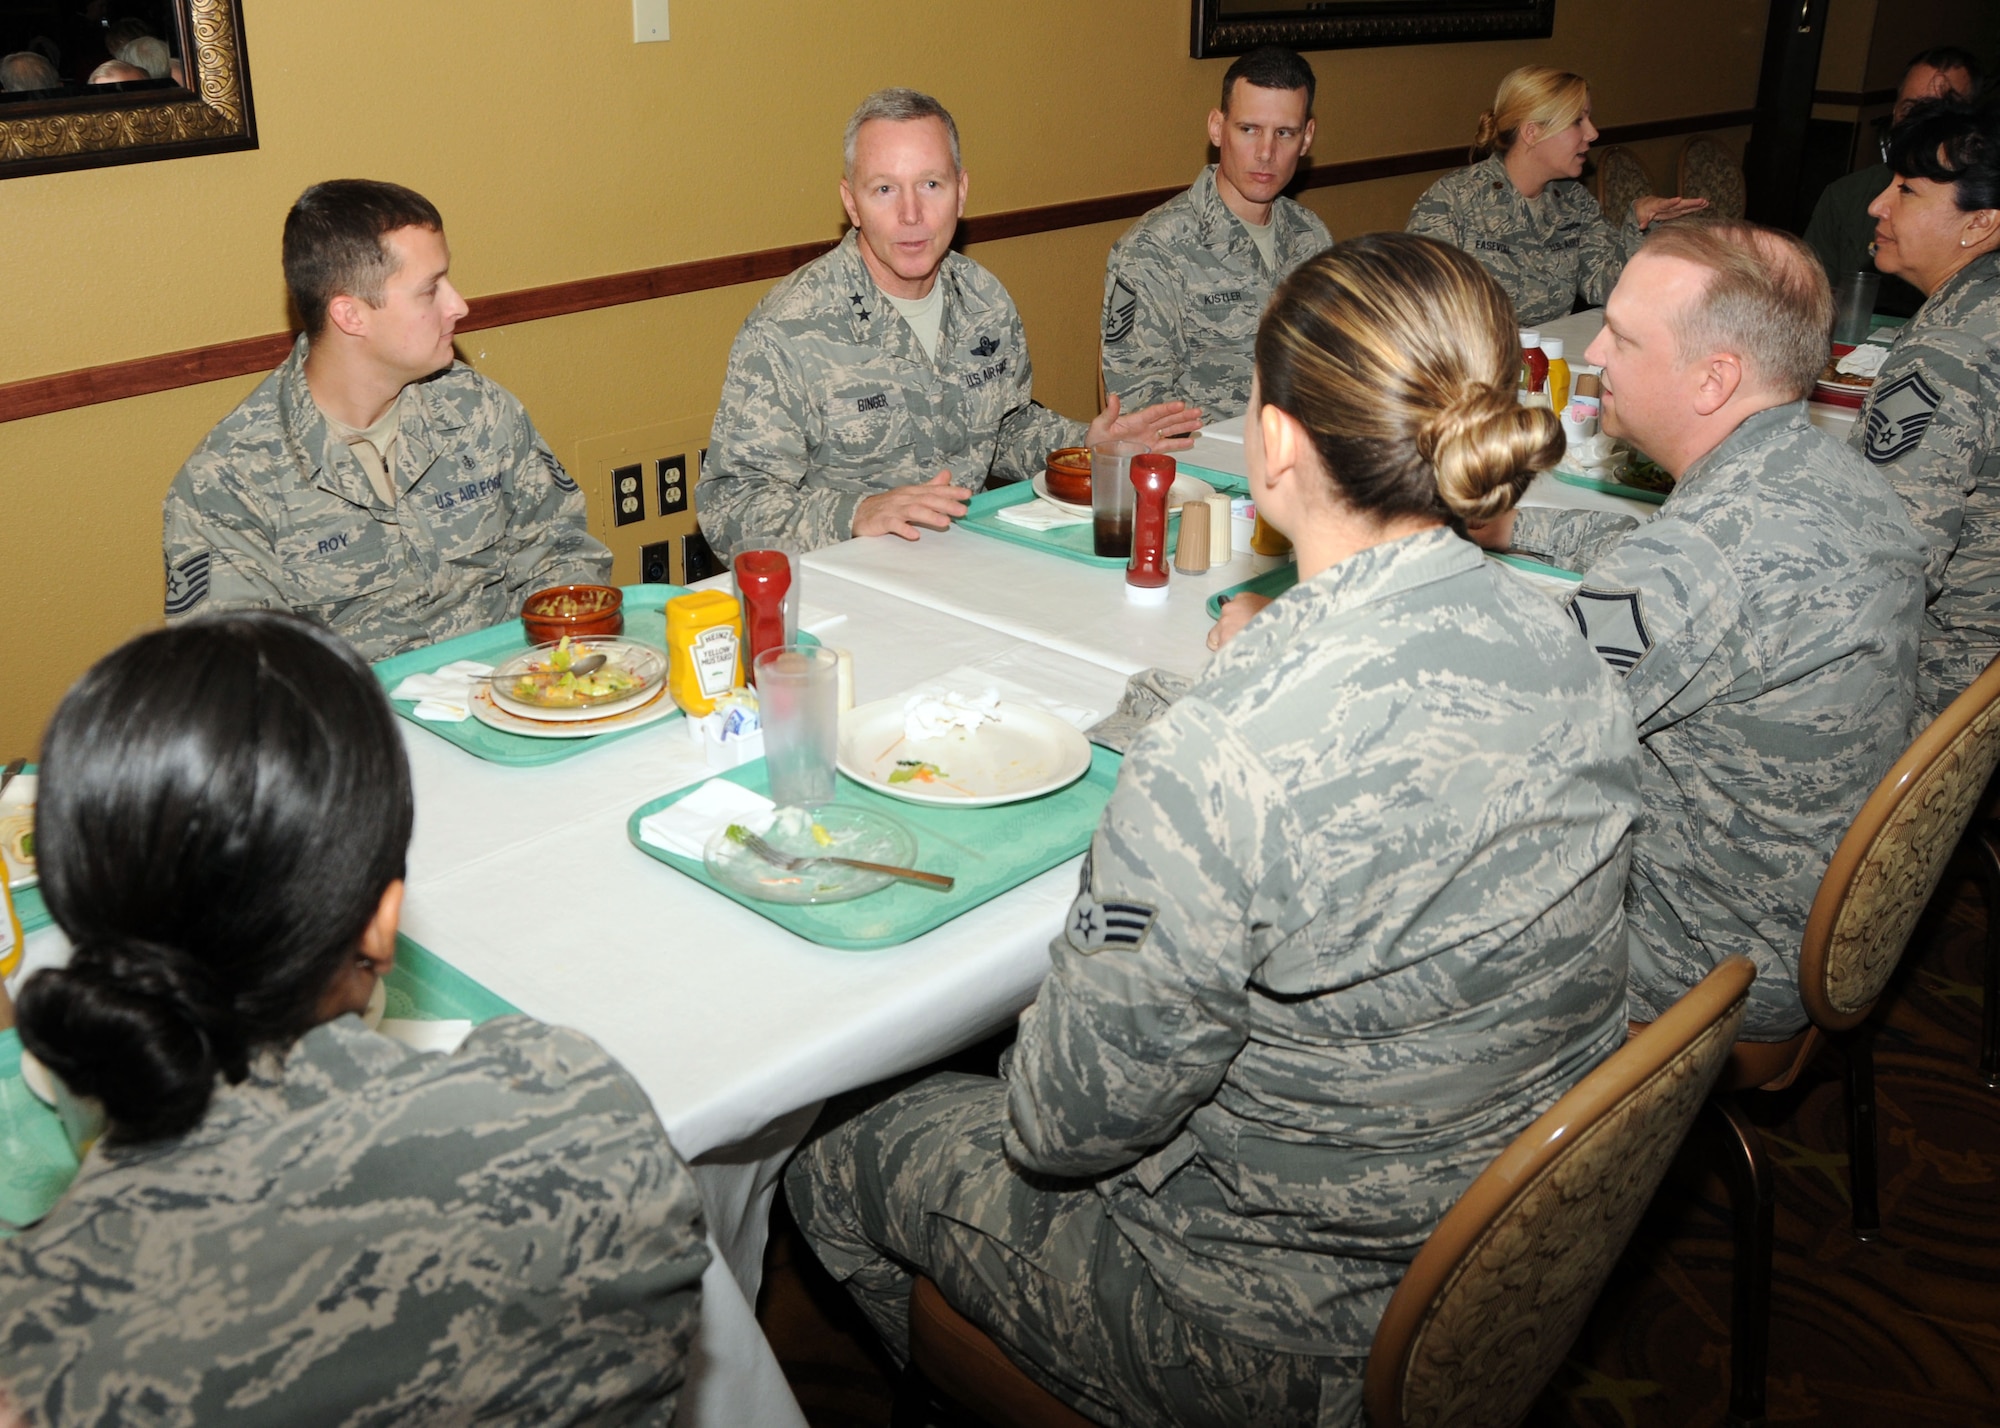 Maj. Gen. William Binger, 10th Air Force Commander, has lunch and talks with members of the 944th Fighter Wing at Club 56 Dec. 9 at Luke Air Force Base, Ariz. The members used this forum to bring up issues pertaining to their benefits and the wing. (U.S. Air Force photo taken by Tech. Sgt. Louis Vega Jr.)